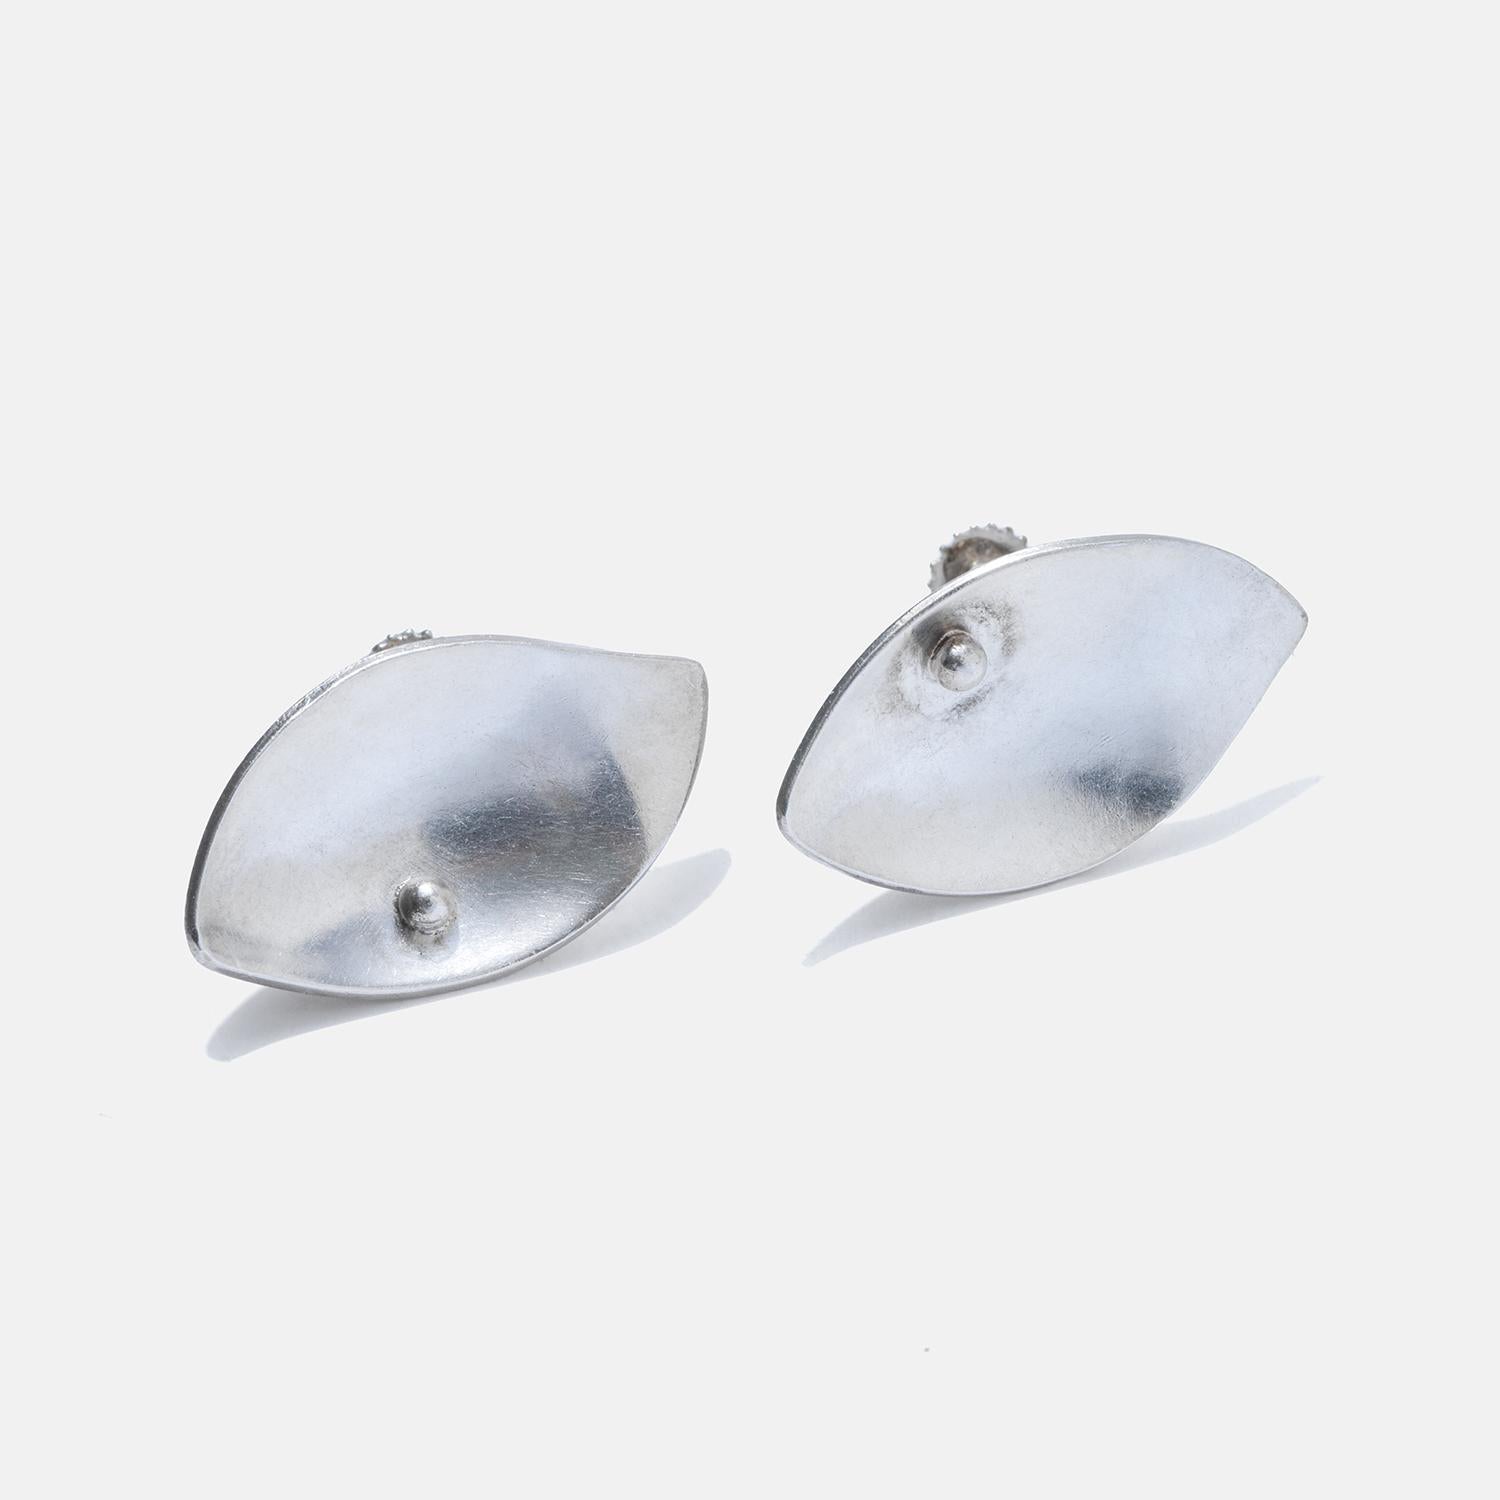 These sterling silver earrings have a sleek leaf-shaped design with a smooth, reflective surface. The earrings are designed to sit flush against the earlobe, creating an elegant and subtle look. Their simple yet stylish leaf shape gives them a